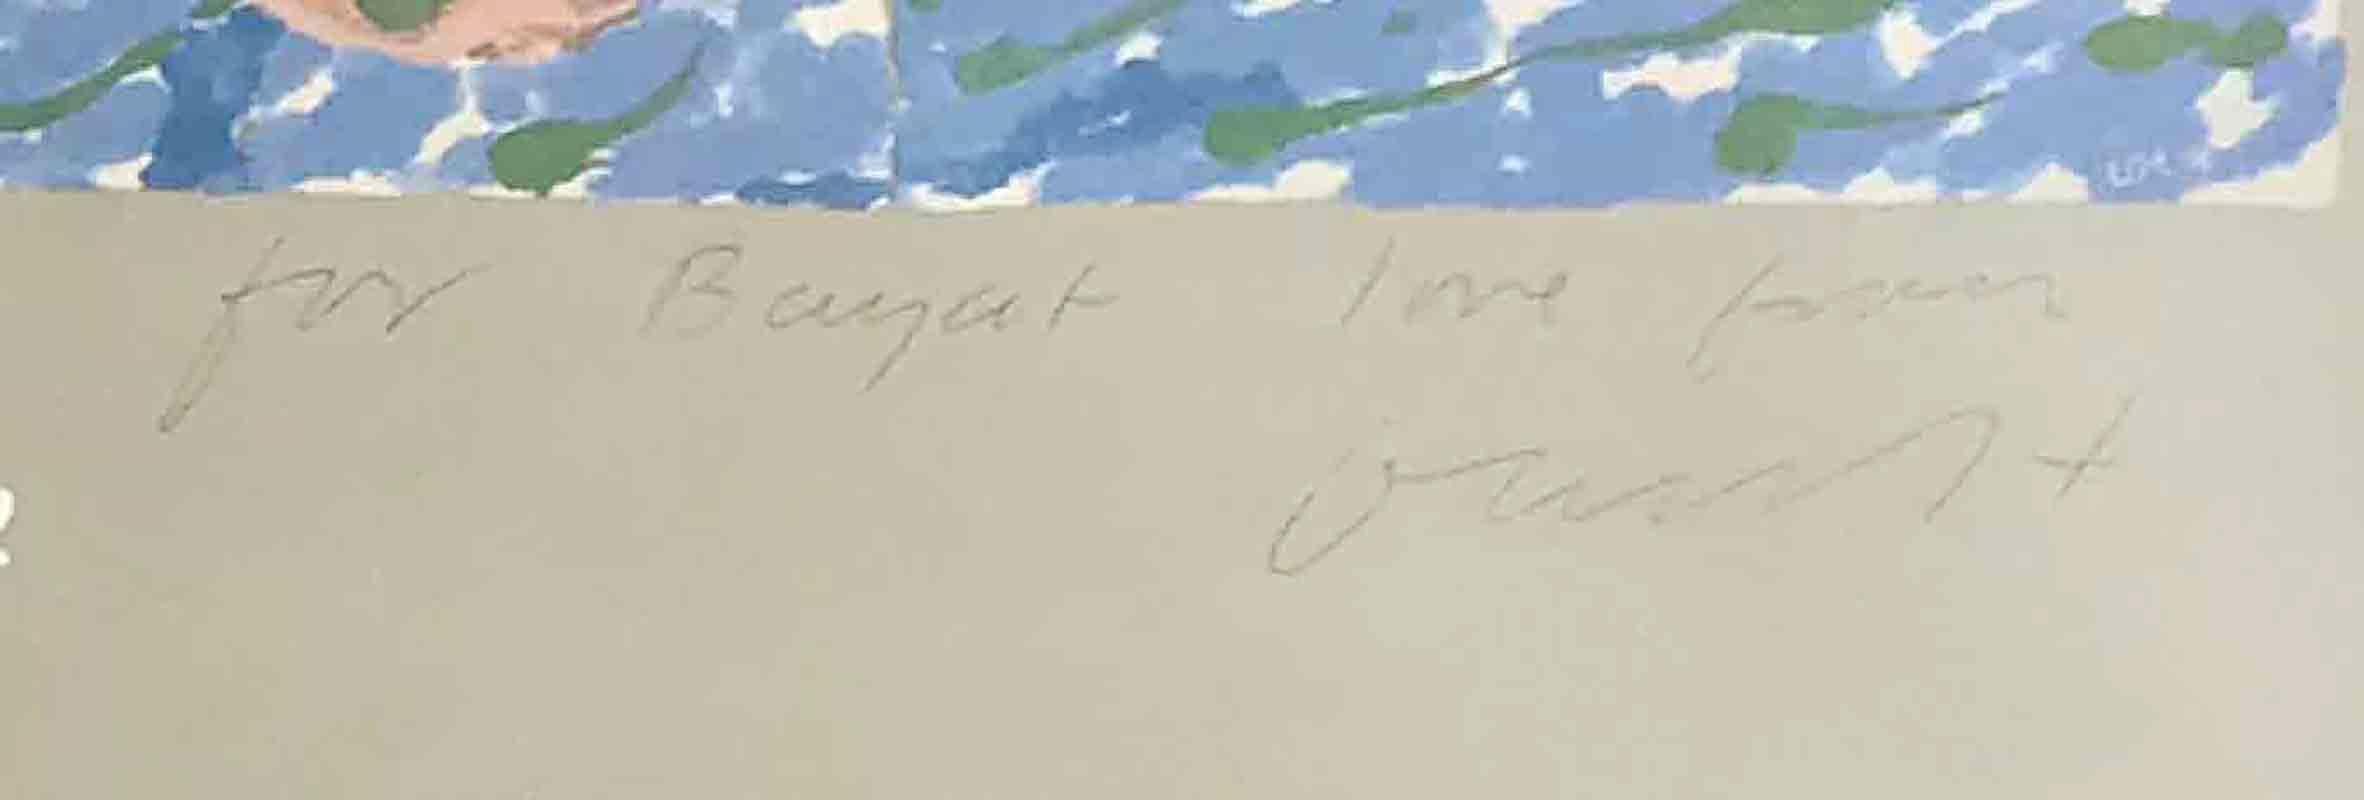 Signed and inscribed large poster by David Hockney 1982. In very good condition. Unframed, will be rolled for shipment.